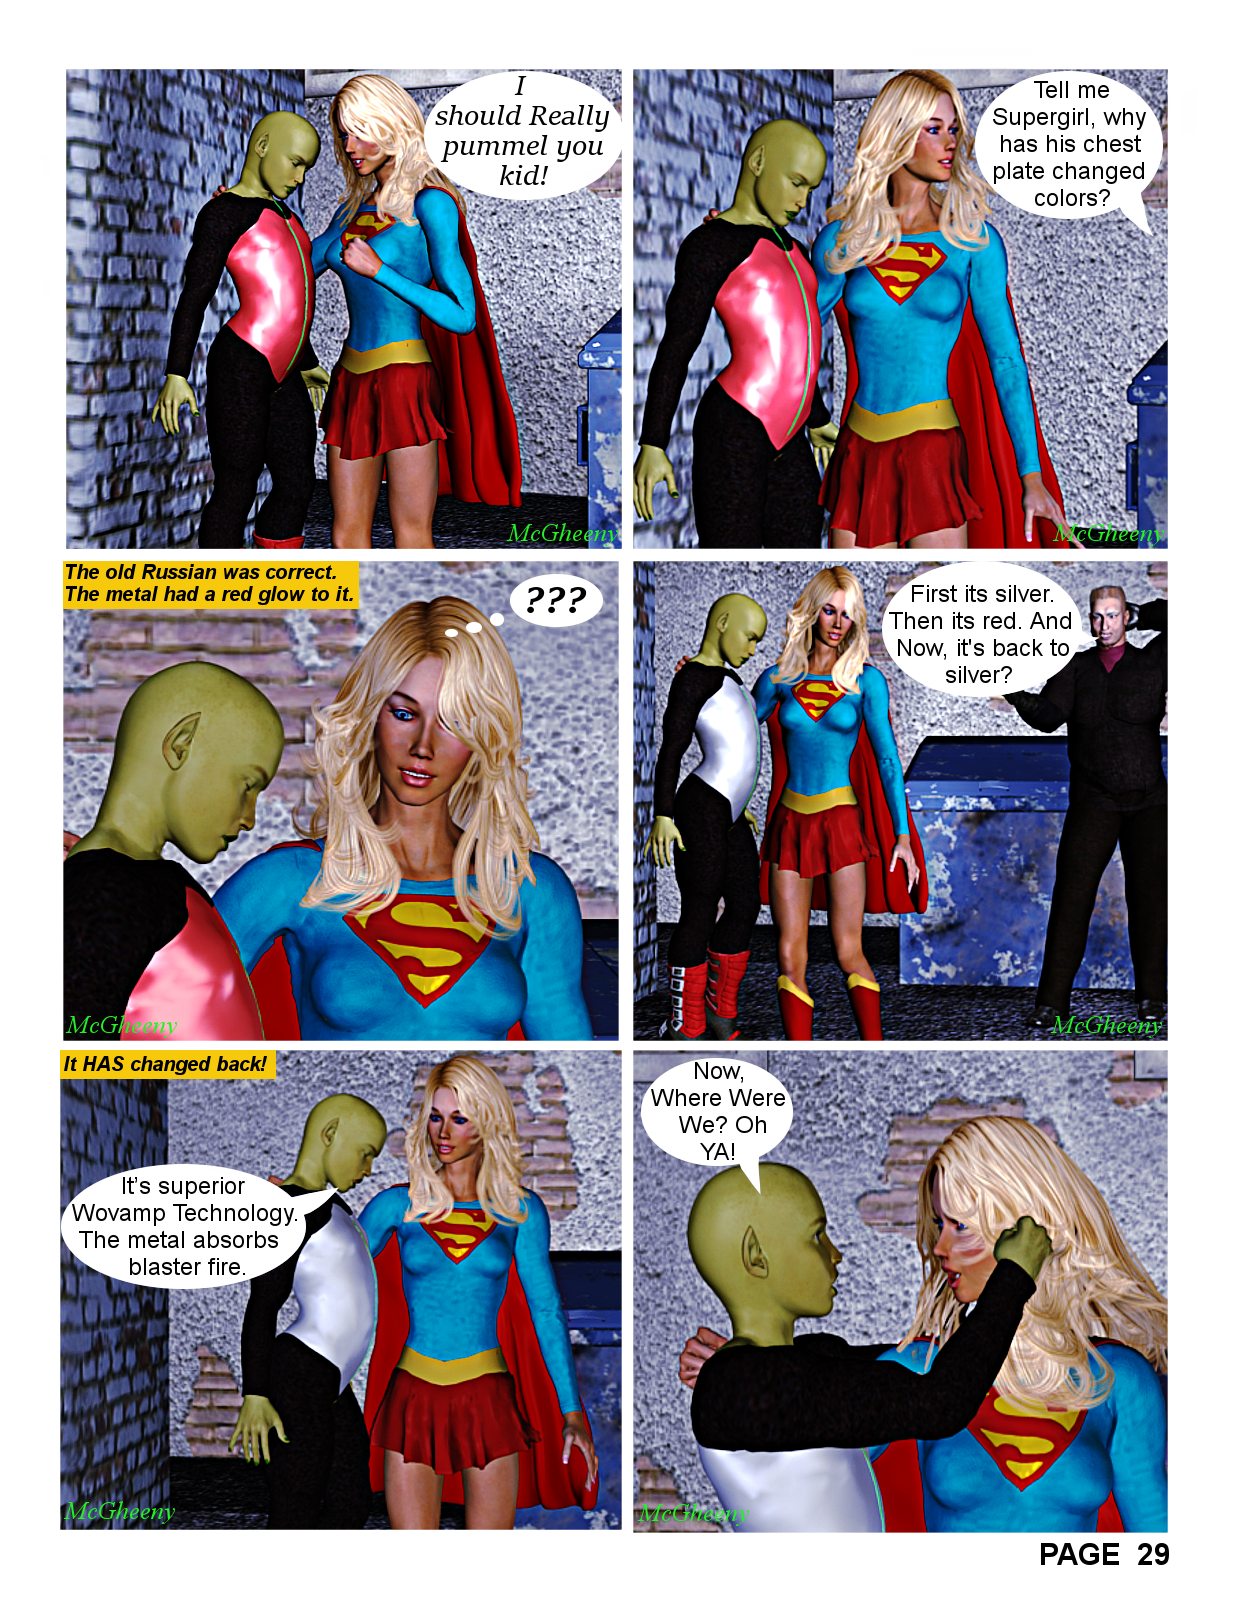 Supergirl in Banors Prize Page 29.png